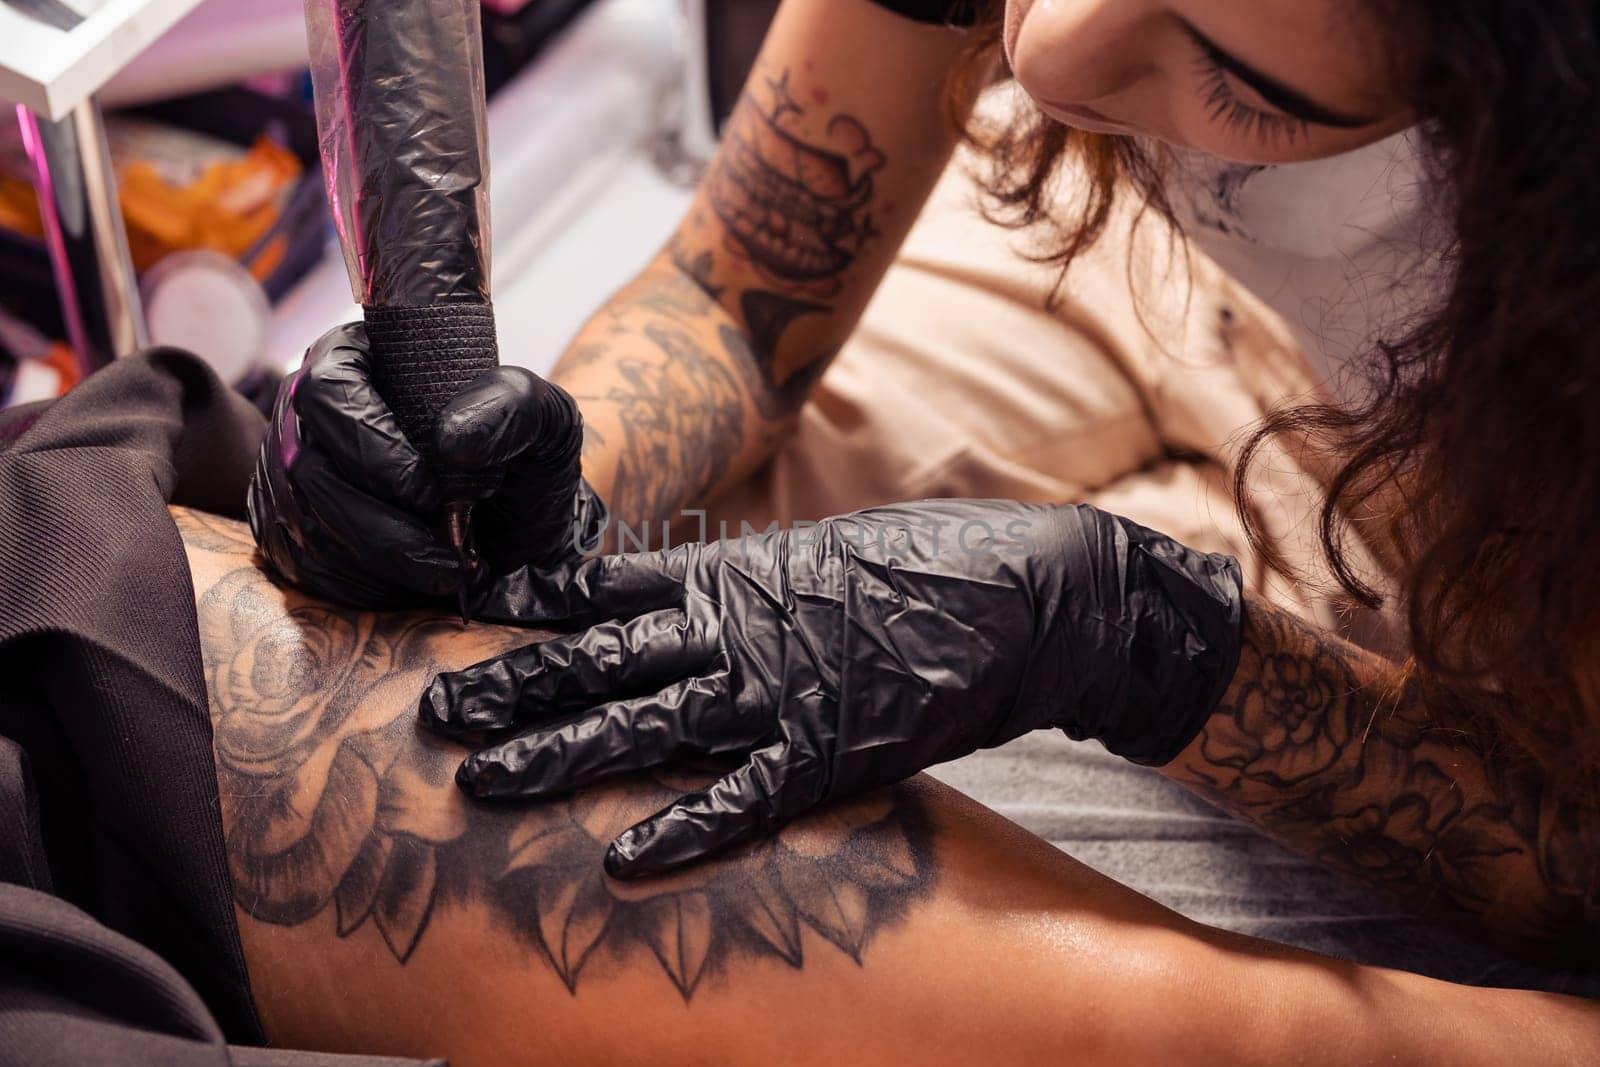 Professional tattooist with focused attention creating black and white flower design on thigh of female client, using tattoo machine